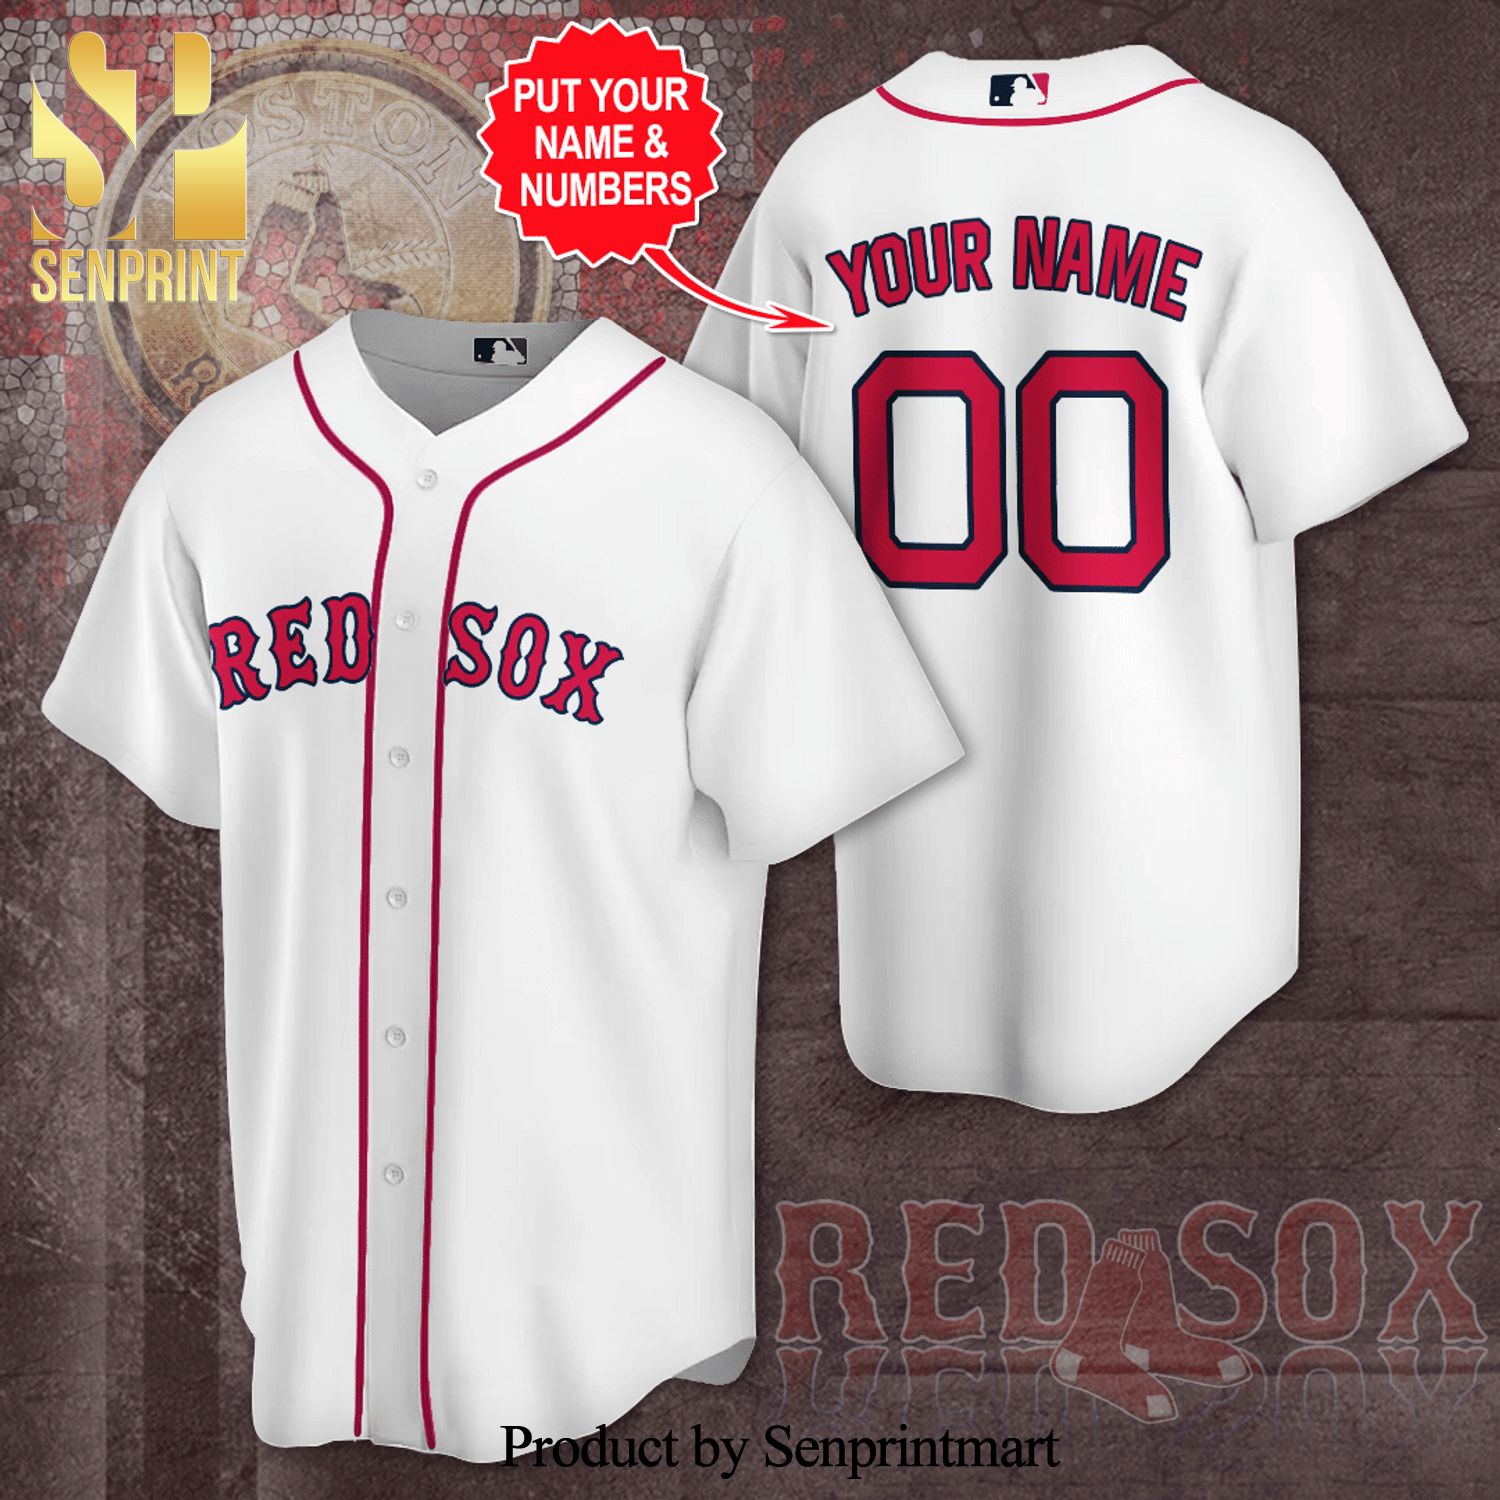 Personalized Boston Red Sox Full Printing Unisex Baseball Jersey - White Gray Red